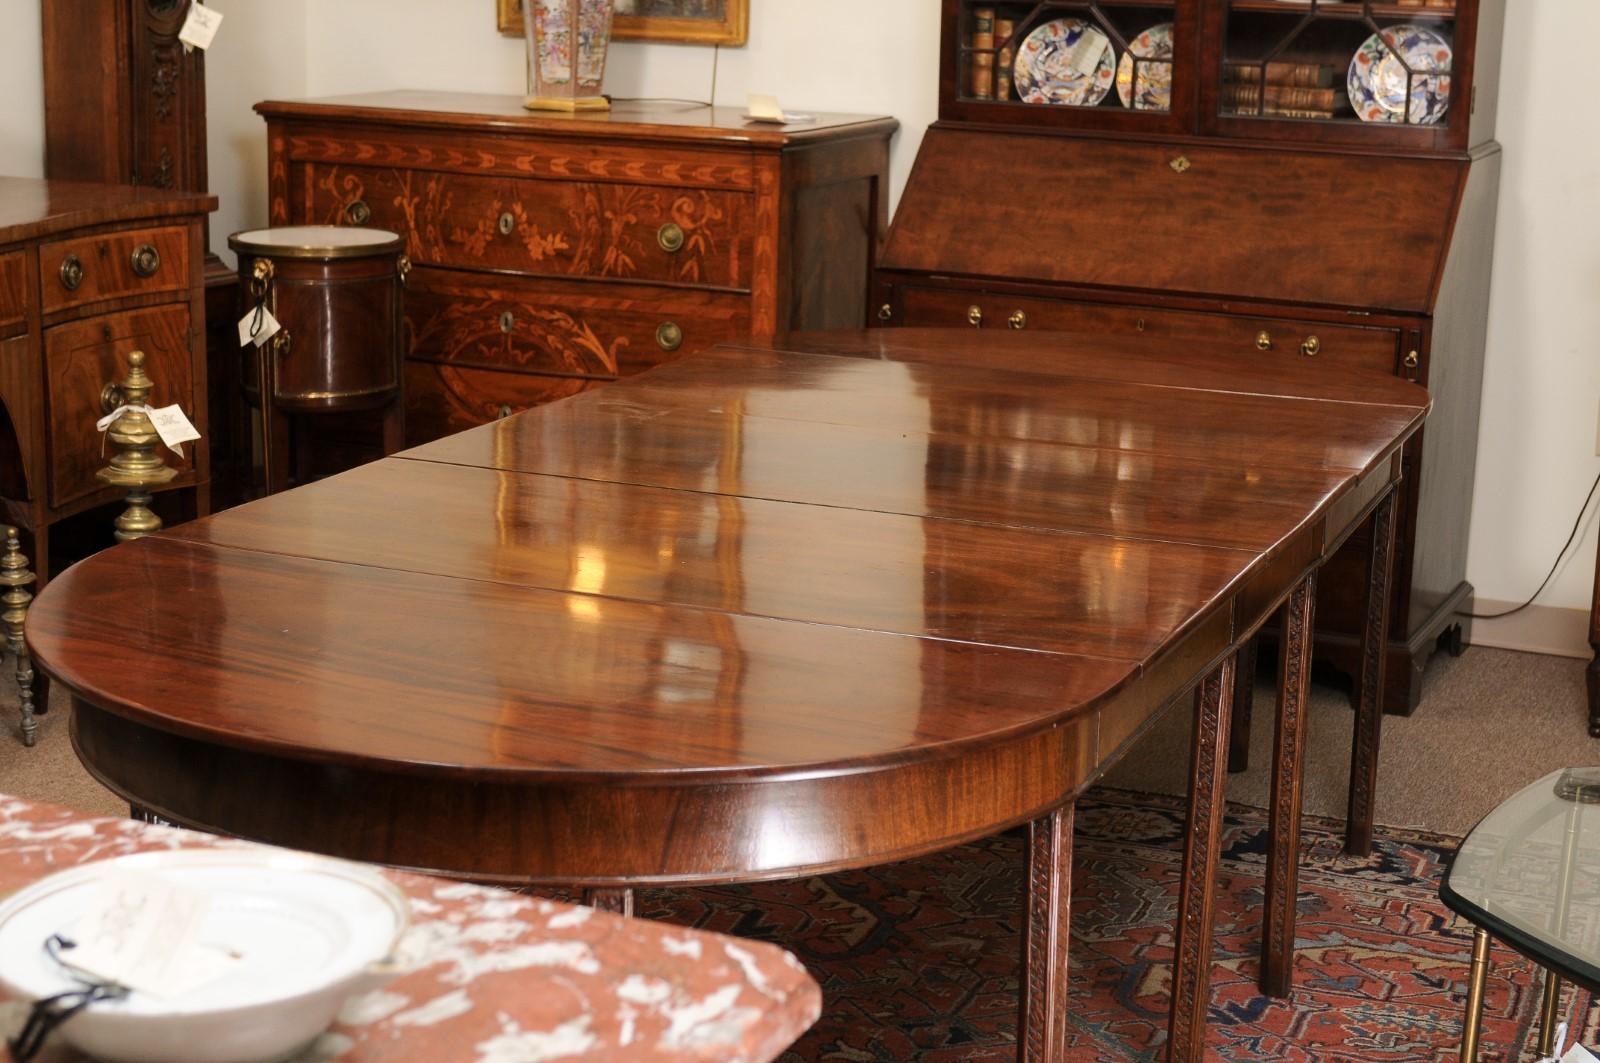 19th Century English Mahogany Dining Table with Carved Legs & 2 Leaves For Sale 2